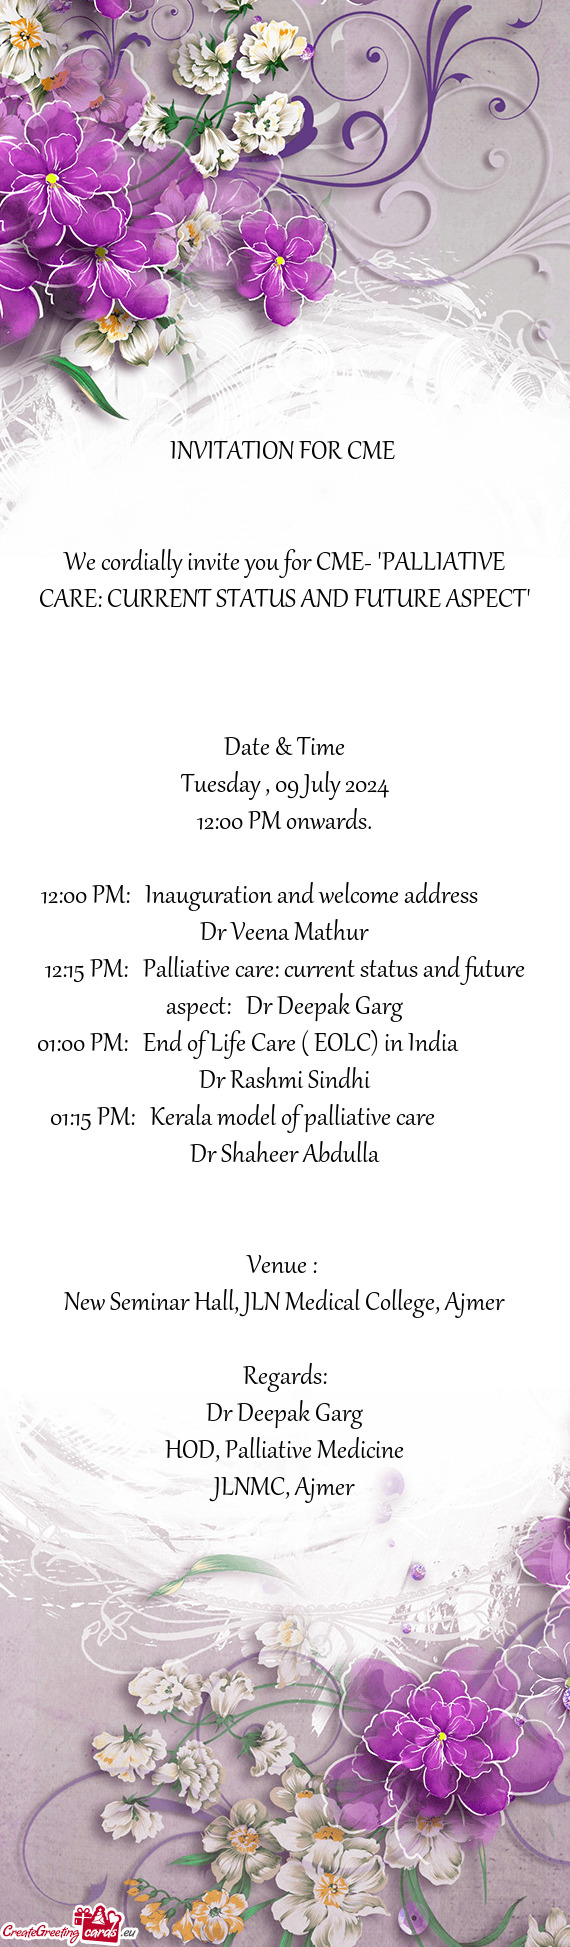 We cordially invite you for CME- 